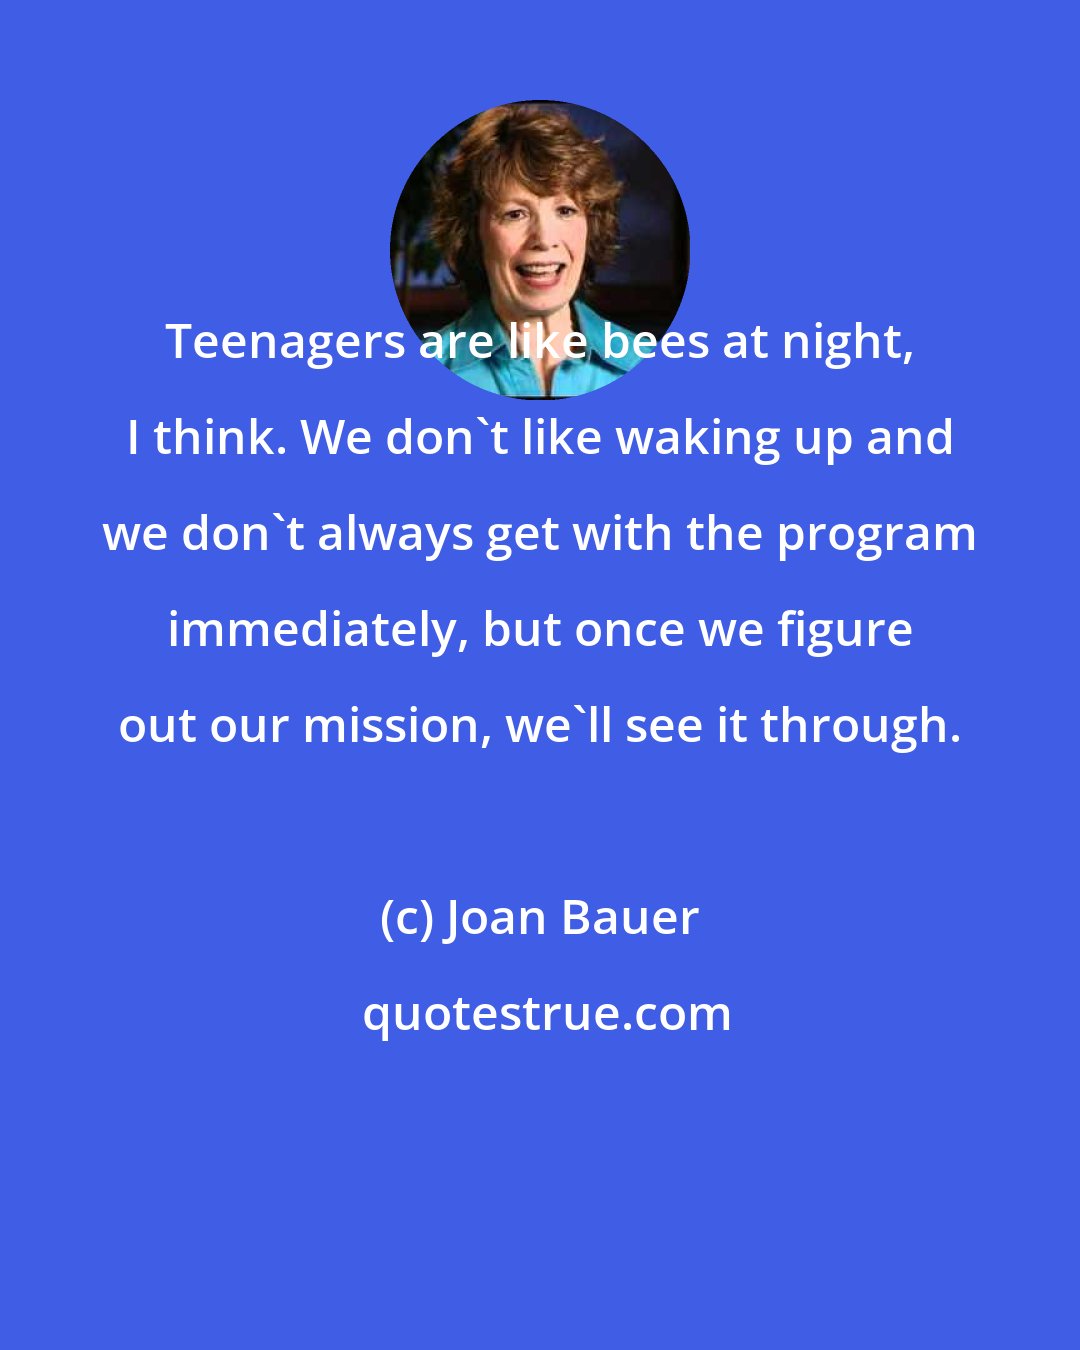 Joan Bauer: Teenagers are like bees at night, I think. We don't like waking up and we don't always get with the program immediately, but once we figure out our mission, we'll see it through.